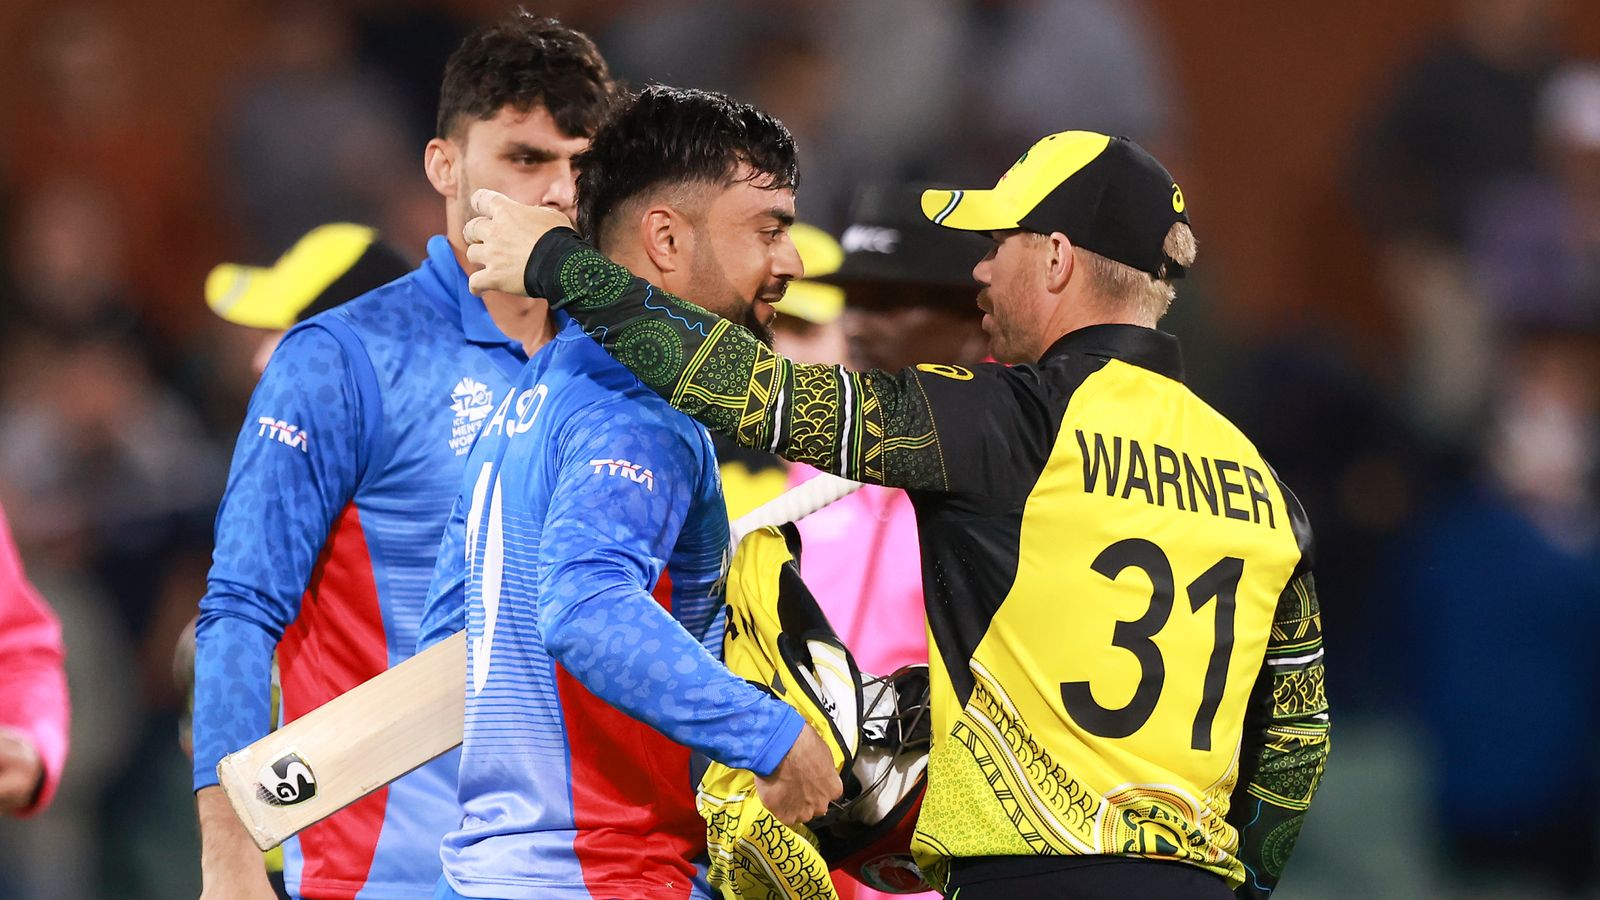 Australia men's cricket team cancels Afghanistan matches over Taliban restrictions on women and girls' freedoms